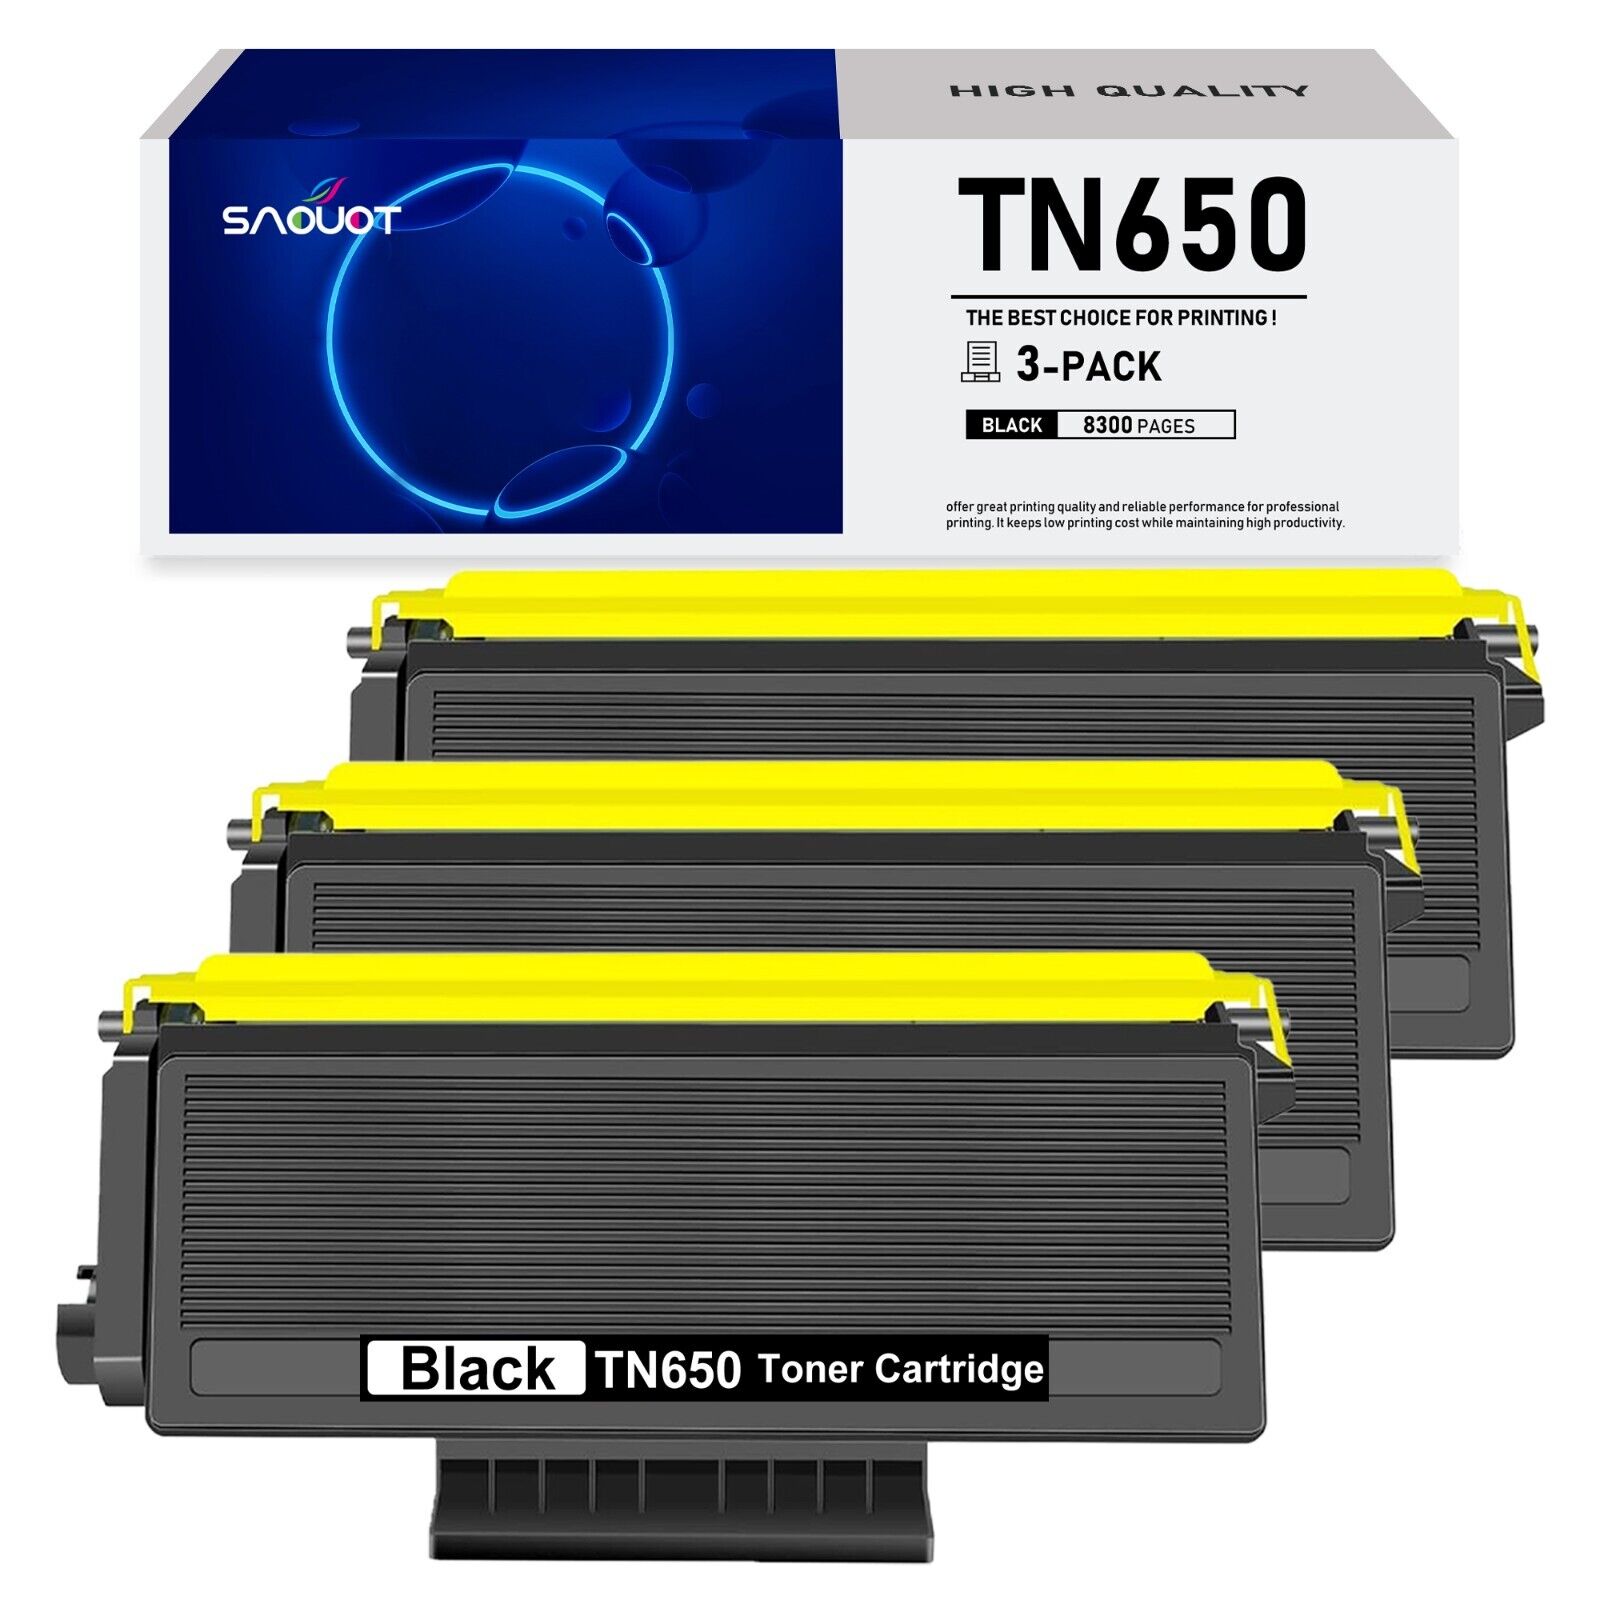 TN650 Toner Cartridge Replacement for Brother HL-5340D 5370DWT MFC-8480DN 8680DN